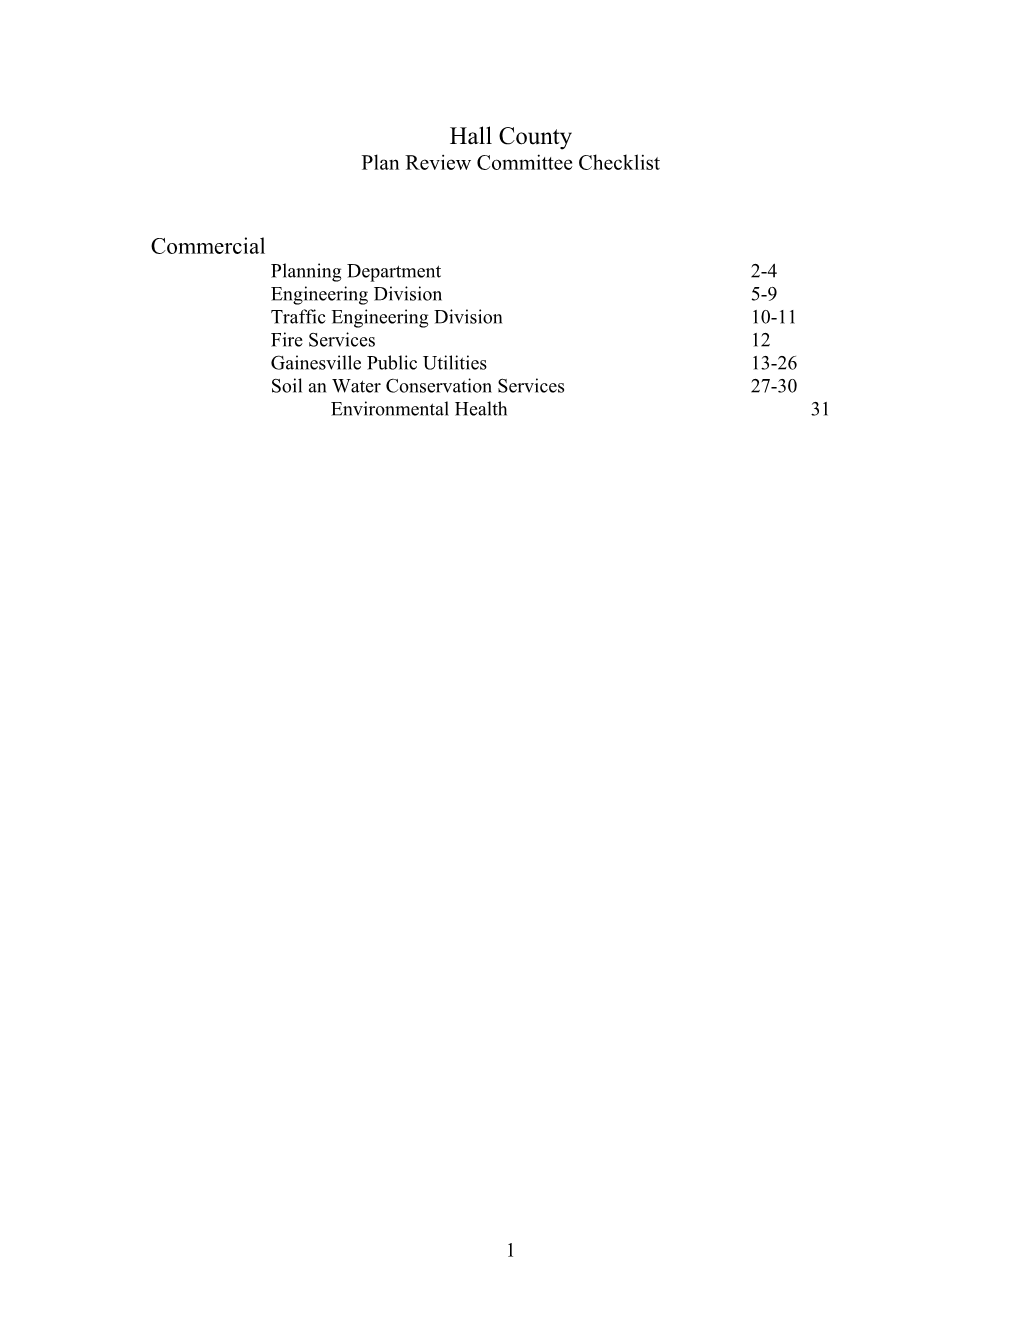 Plan Review Committee Checklist